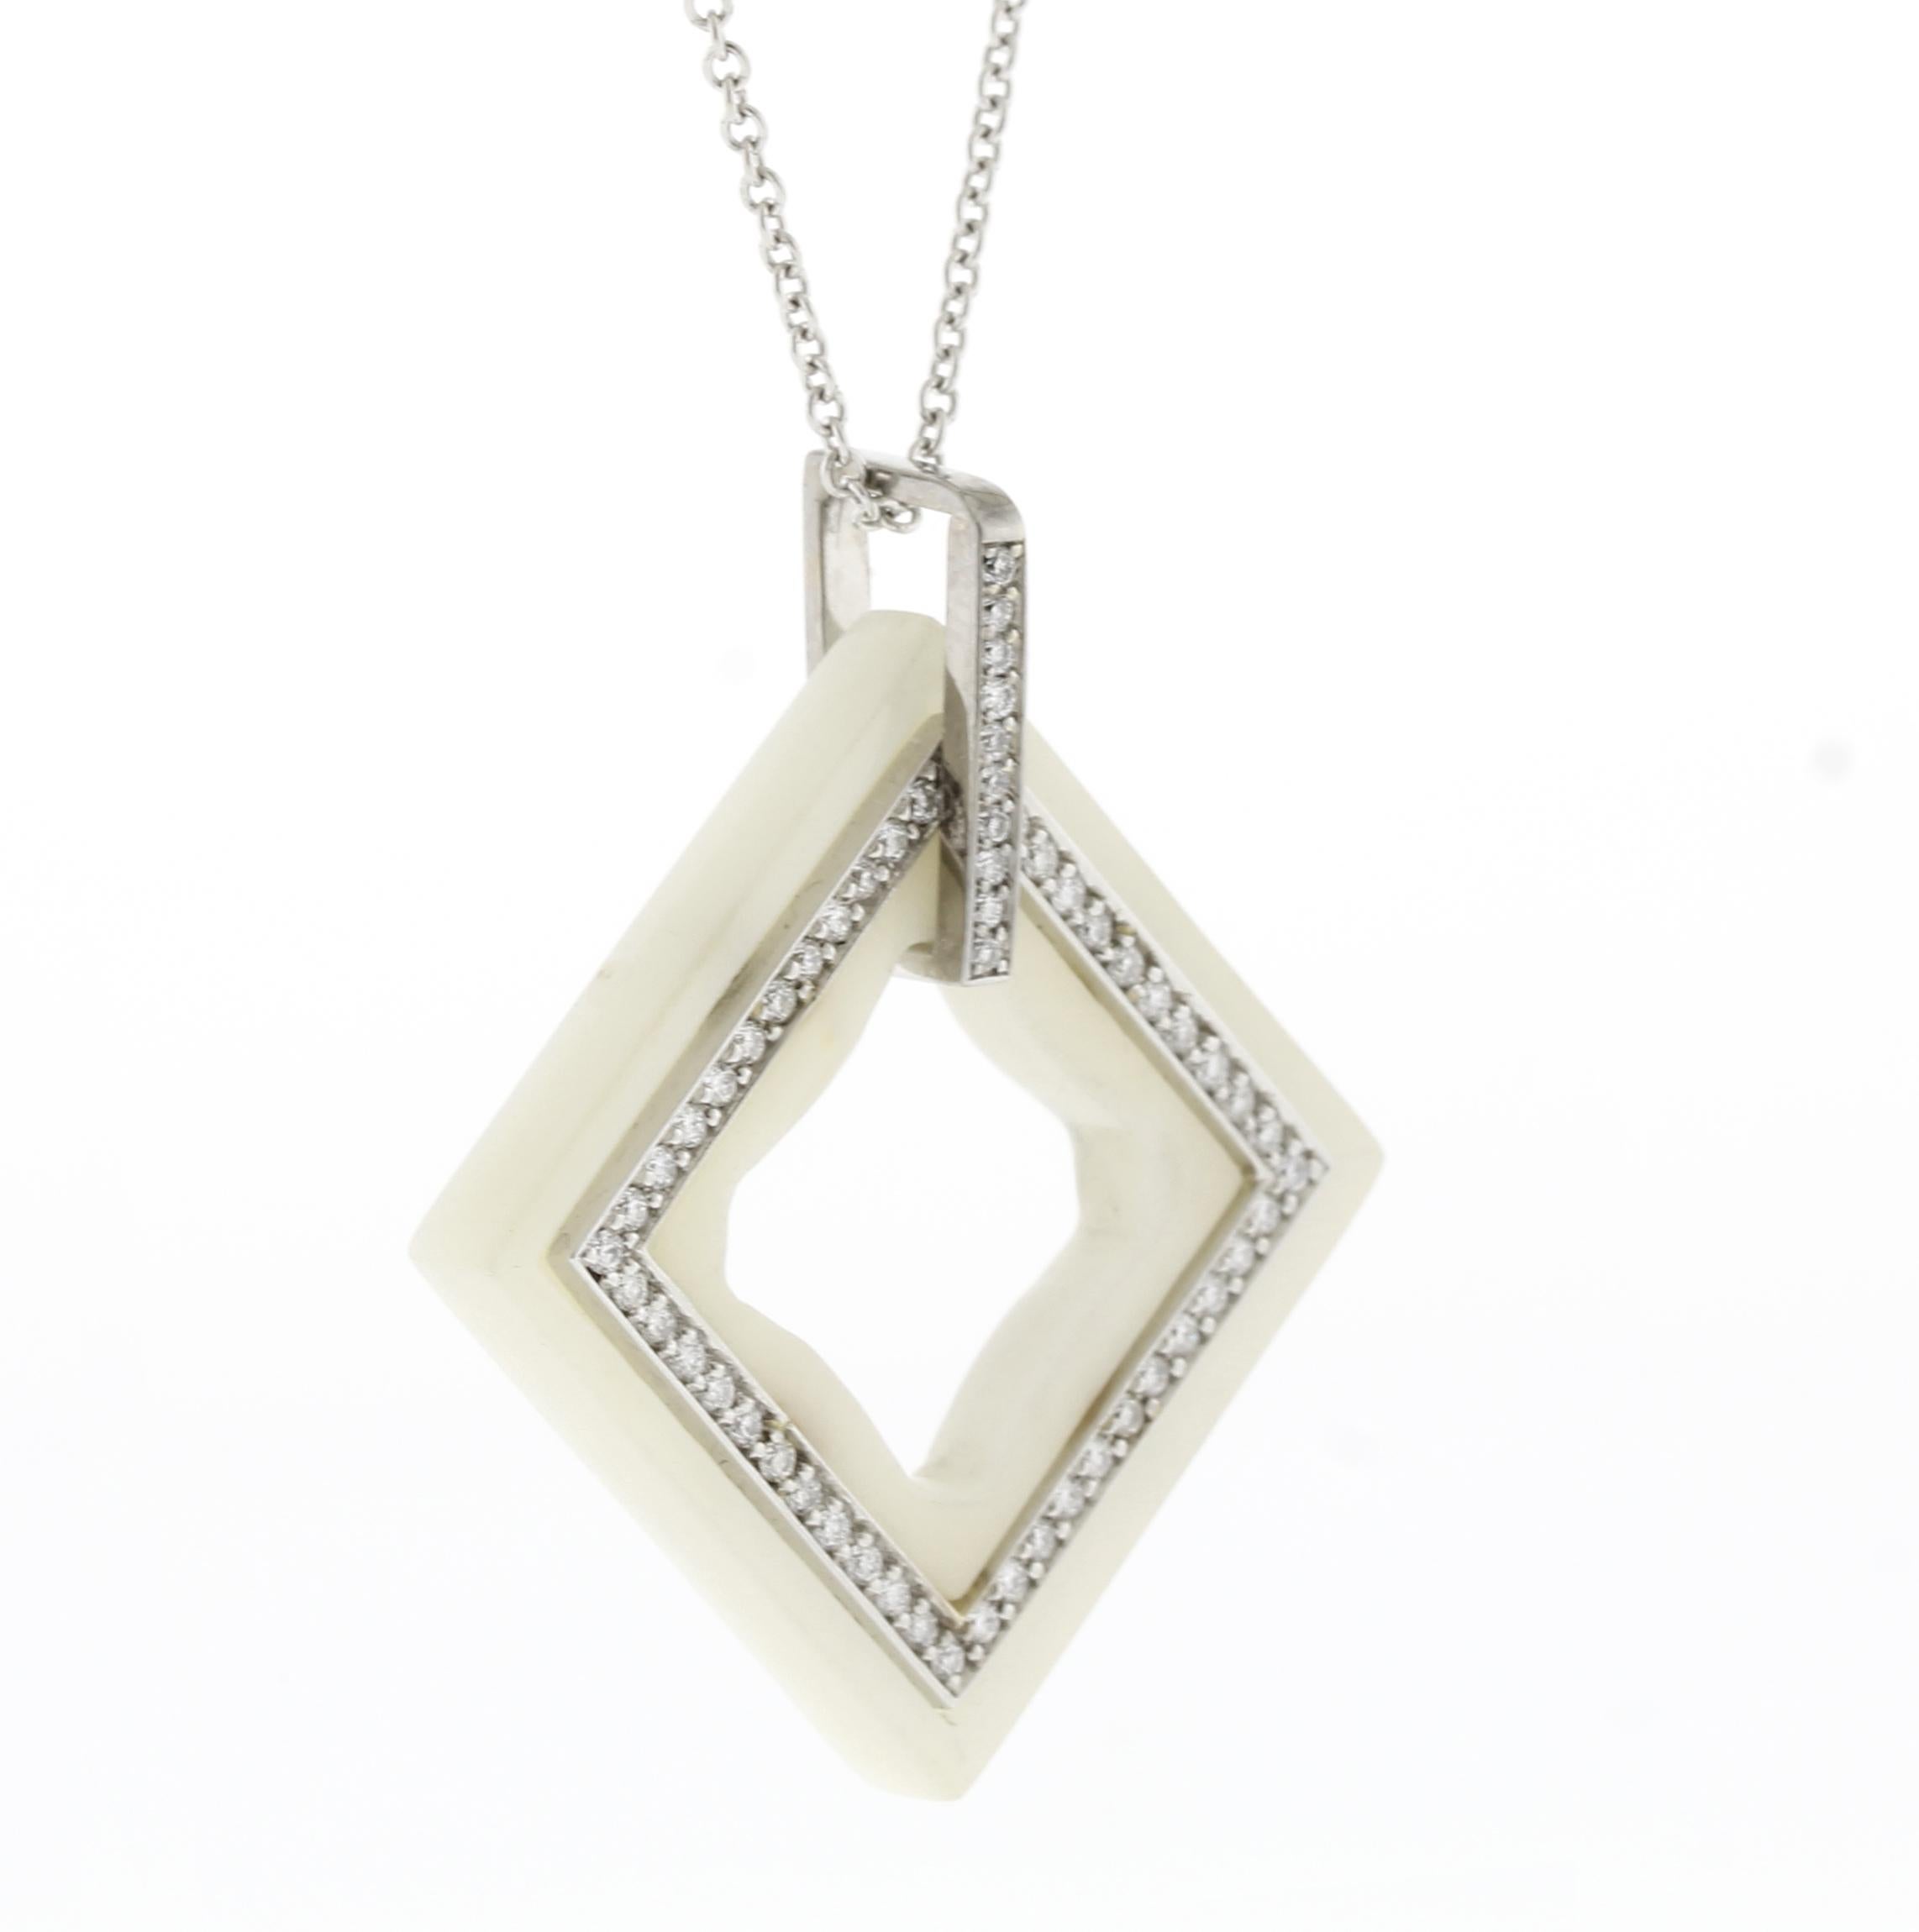 From Irthly by David Alvarado, a Taqua Nut Palm Ivory Diamond Frame Pendant. Palm Ivory is carved from the Taqua nut also know as vegetable ivory. A sustainable nut that resembles animal Ivory that can be sustainably grown and harvested
♦ Designer: